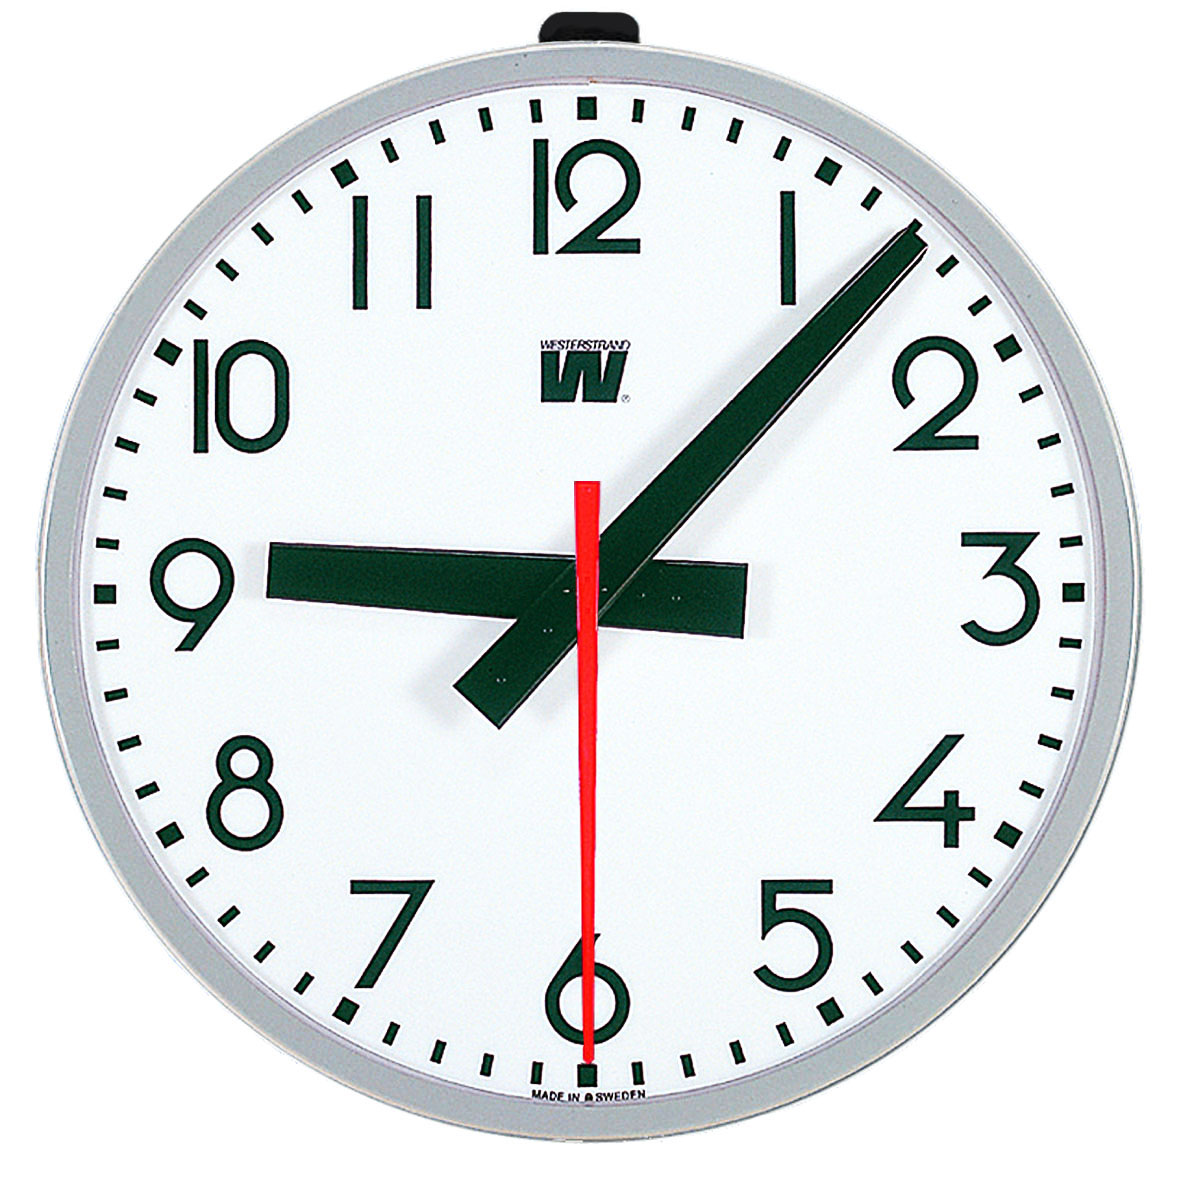 online analog clock with seconds